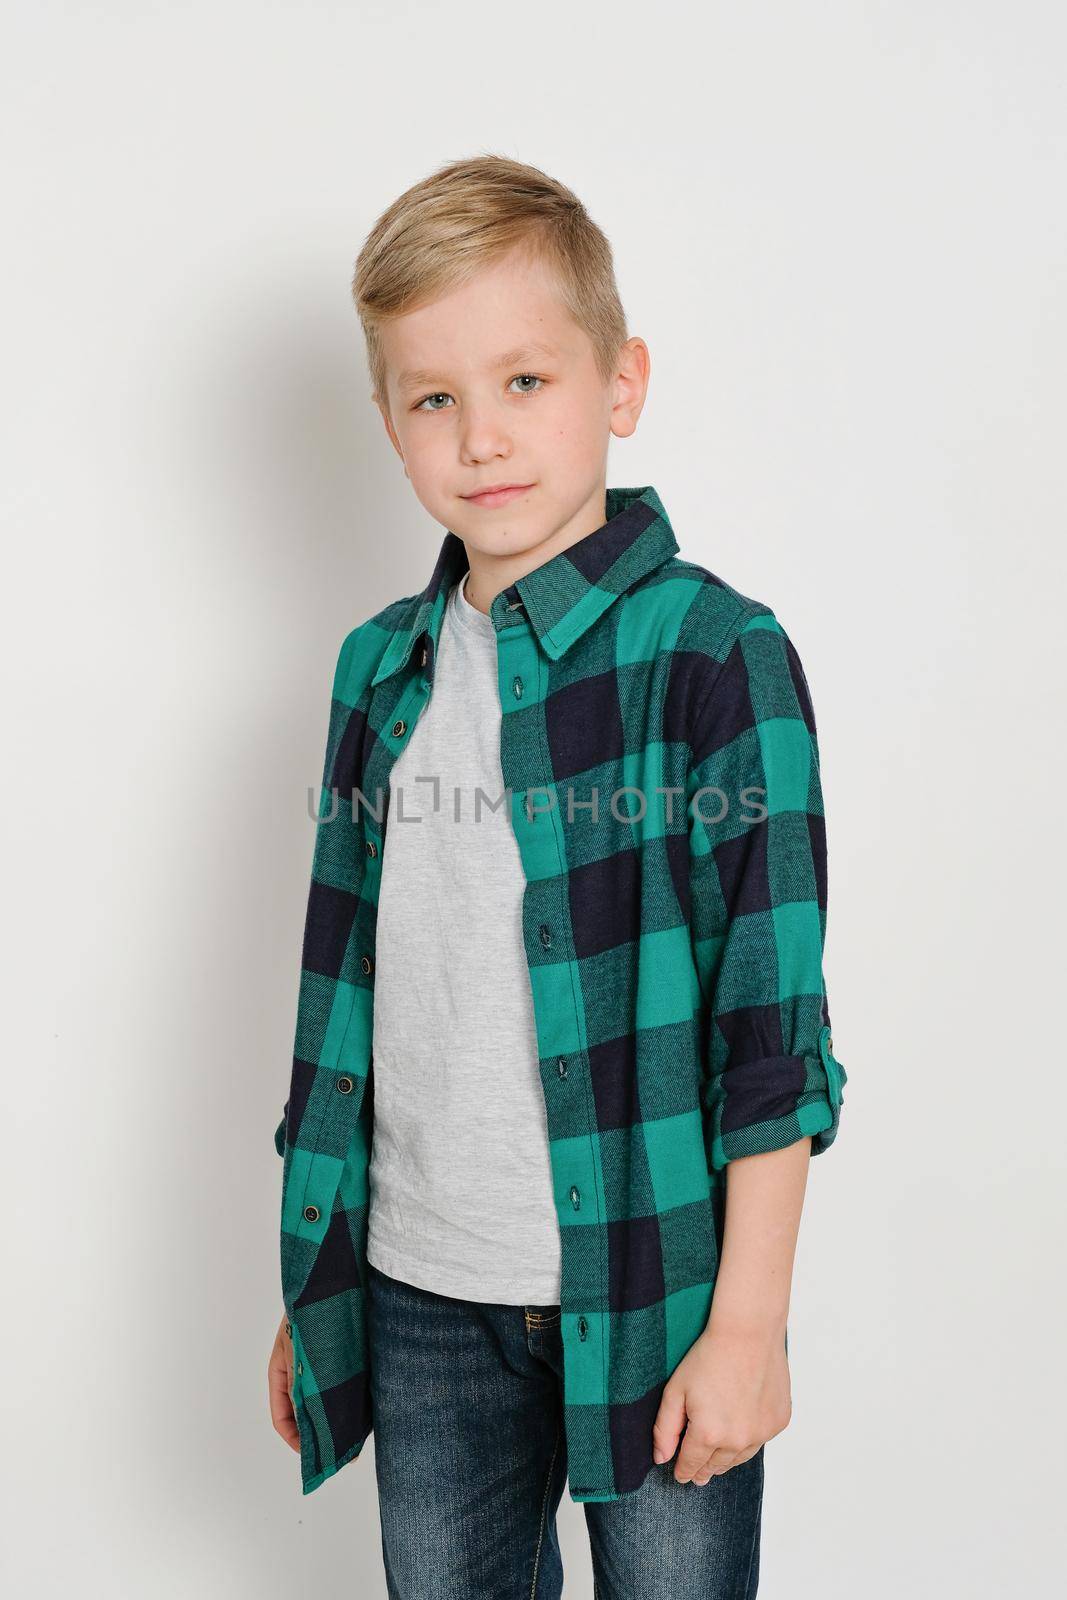 Portrait of cute stylish blond boy kid 7 years old in checked shirt and jeans by natus111